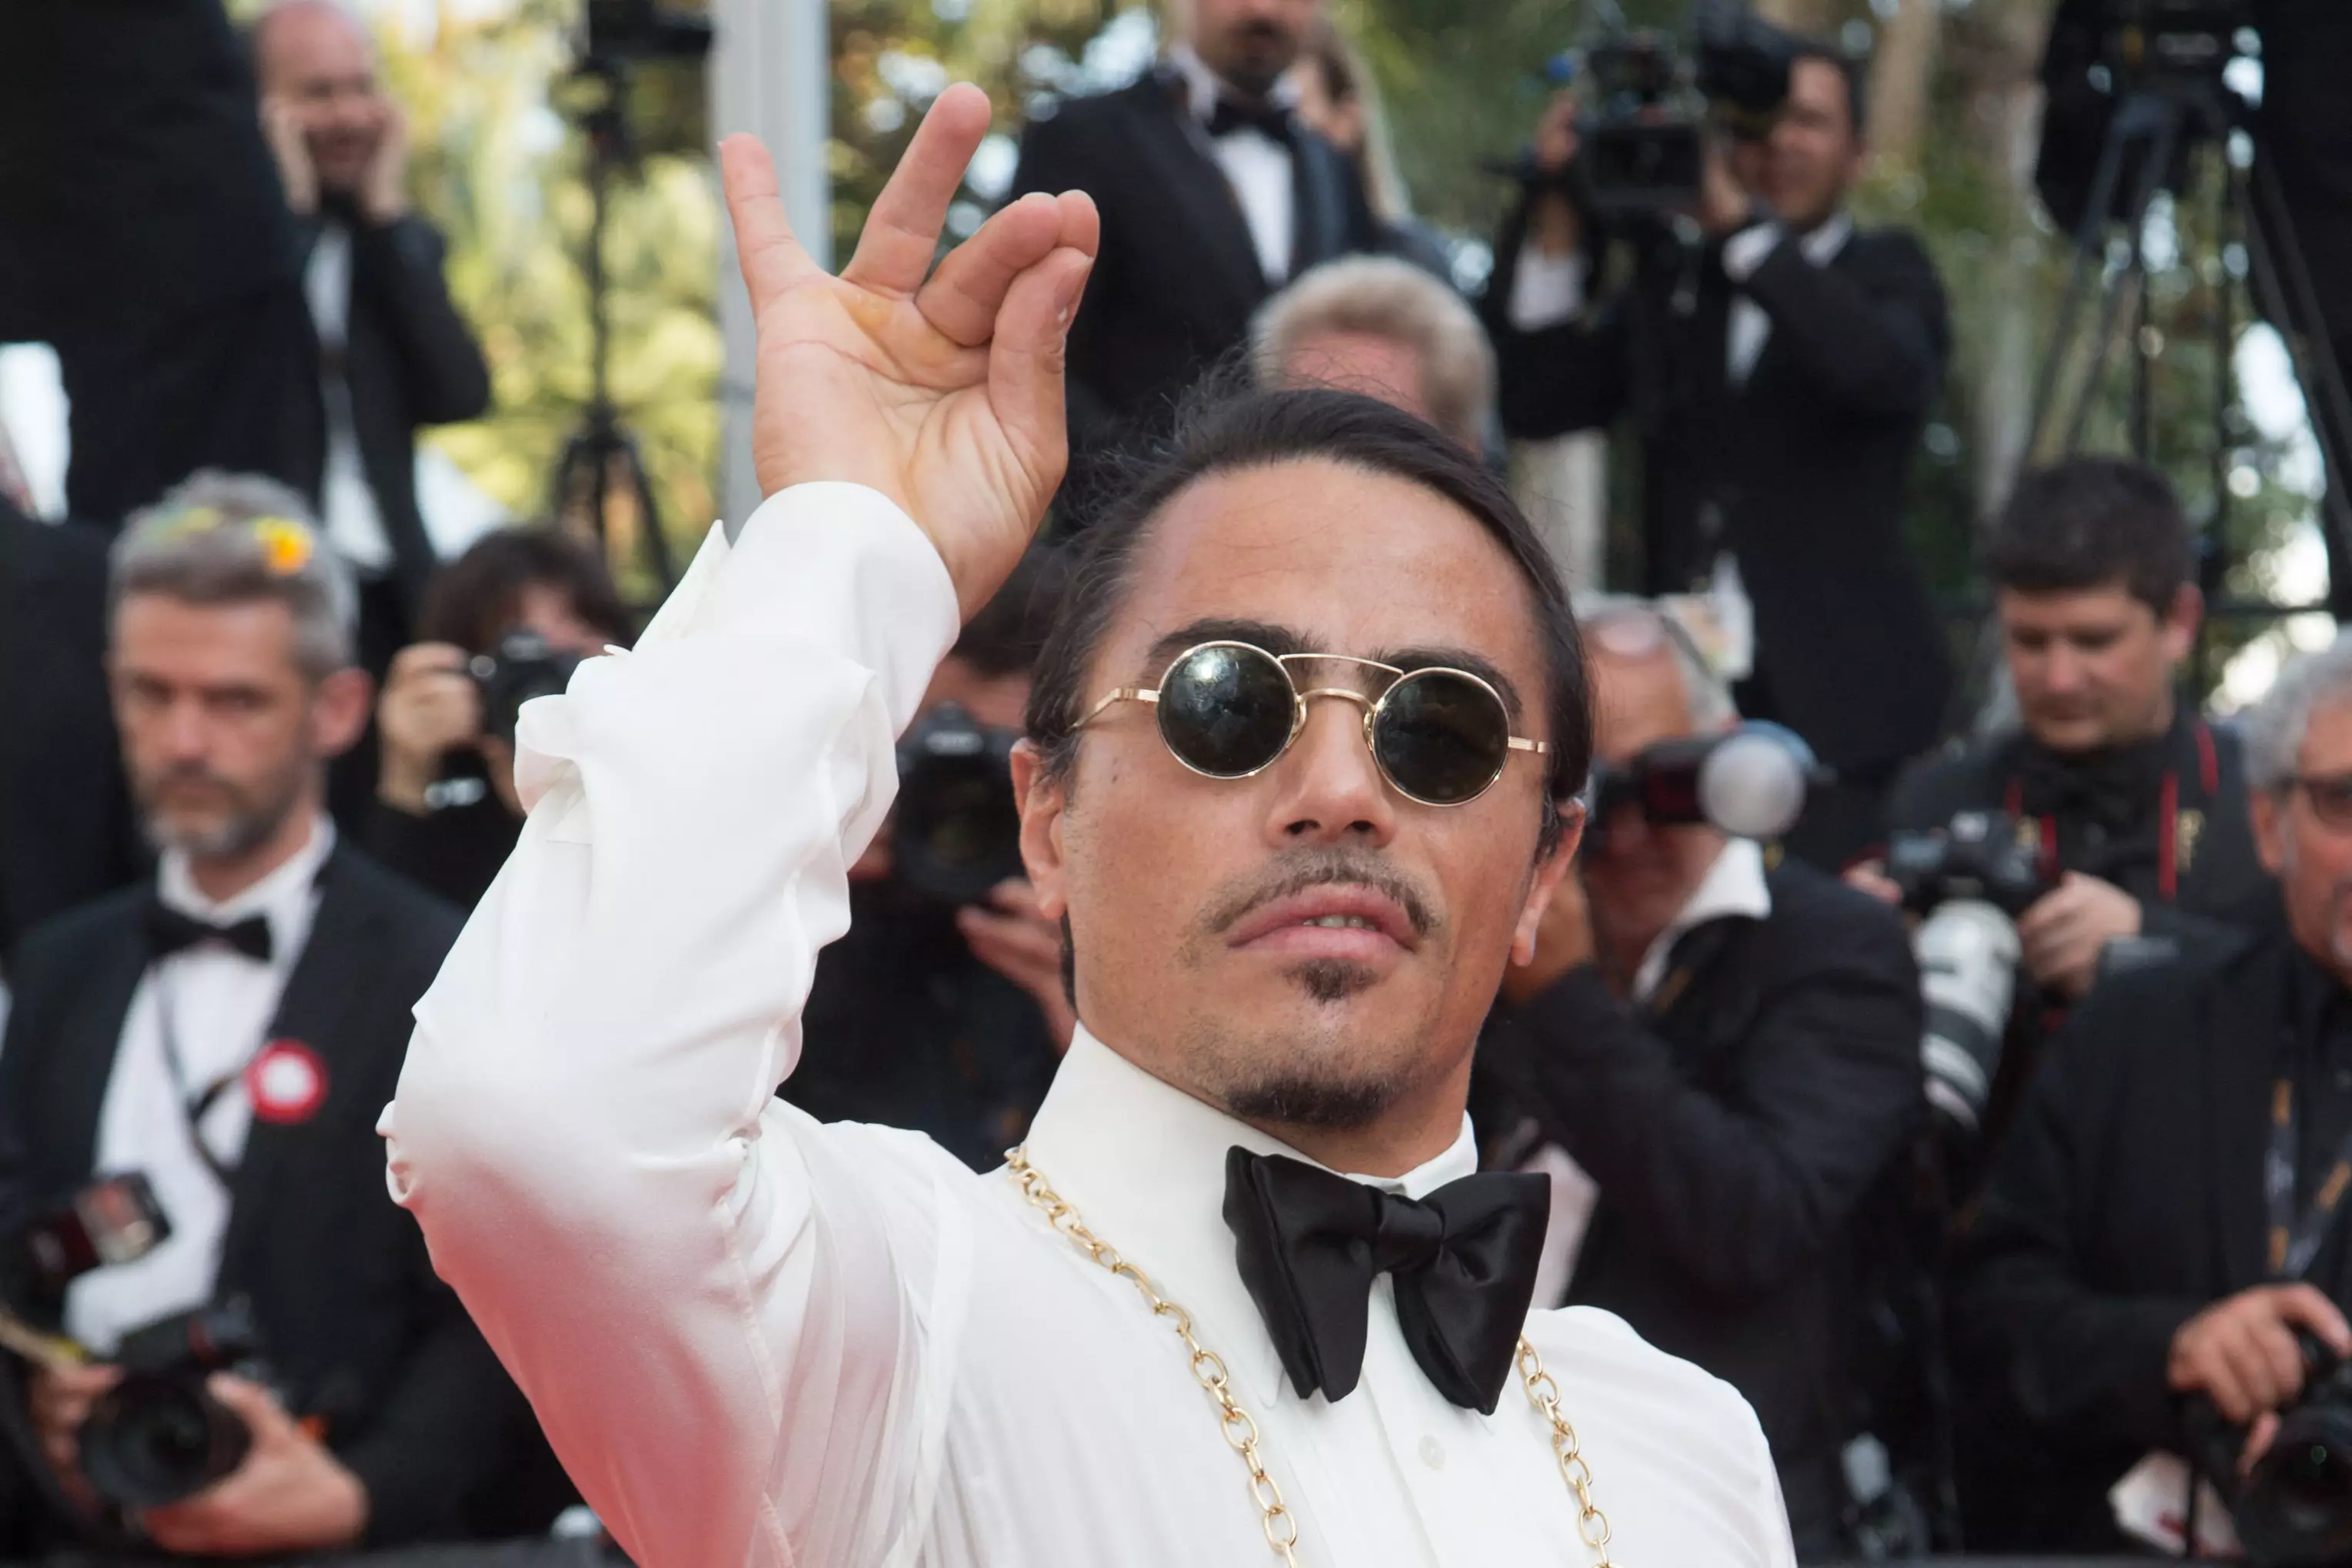 Salt Bae doing his iconic salt sprinkling action on the red carpet at the Cannes Film Festival in 2019. (